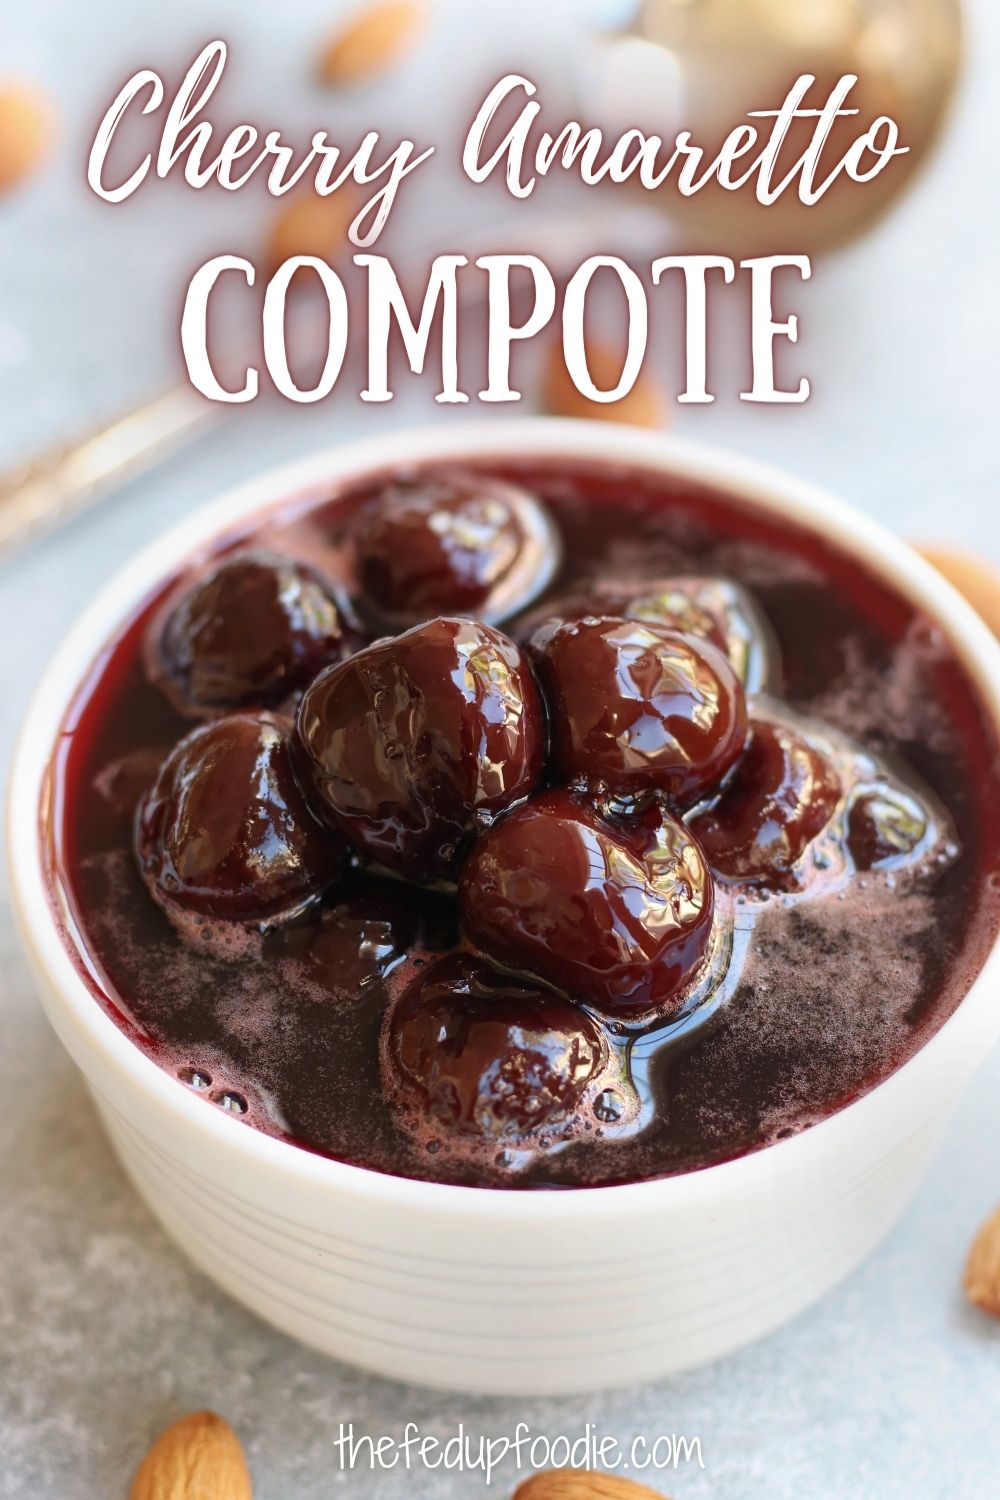 Cherries and amaretto play so well together in this luxurious and very easy to make Cherry Amaretto Compote. Use either fresh or frozen cherries to make this tasty sauce that is perfect on ice cream, cheesecake and pancakes. 
#CherryCompote #CherryCompoteRecipe #CherryCompoteEasy #CherryCompoteFrozen #AmarettoCherryCompote #CherryAmaretto 